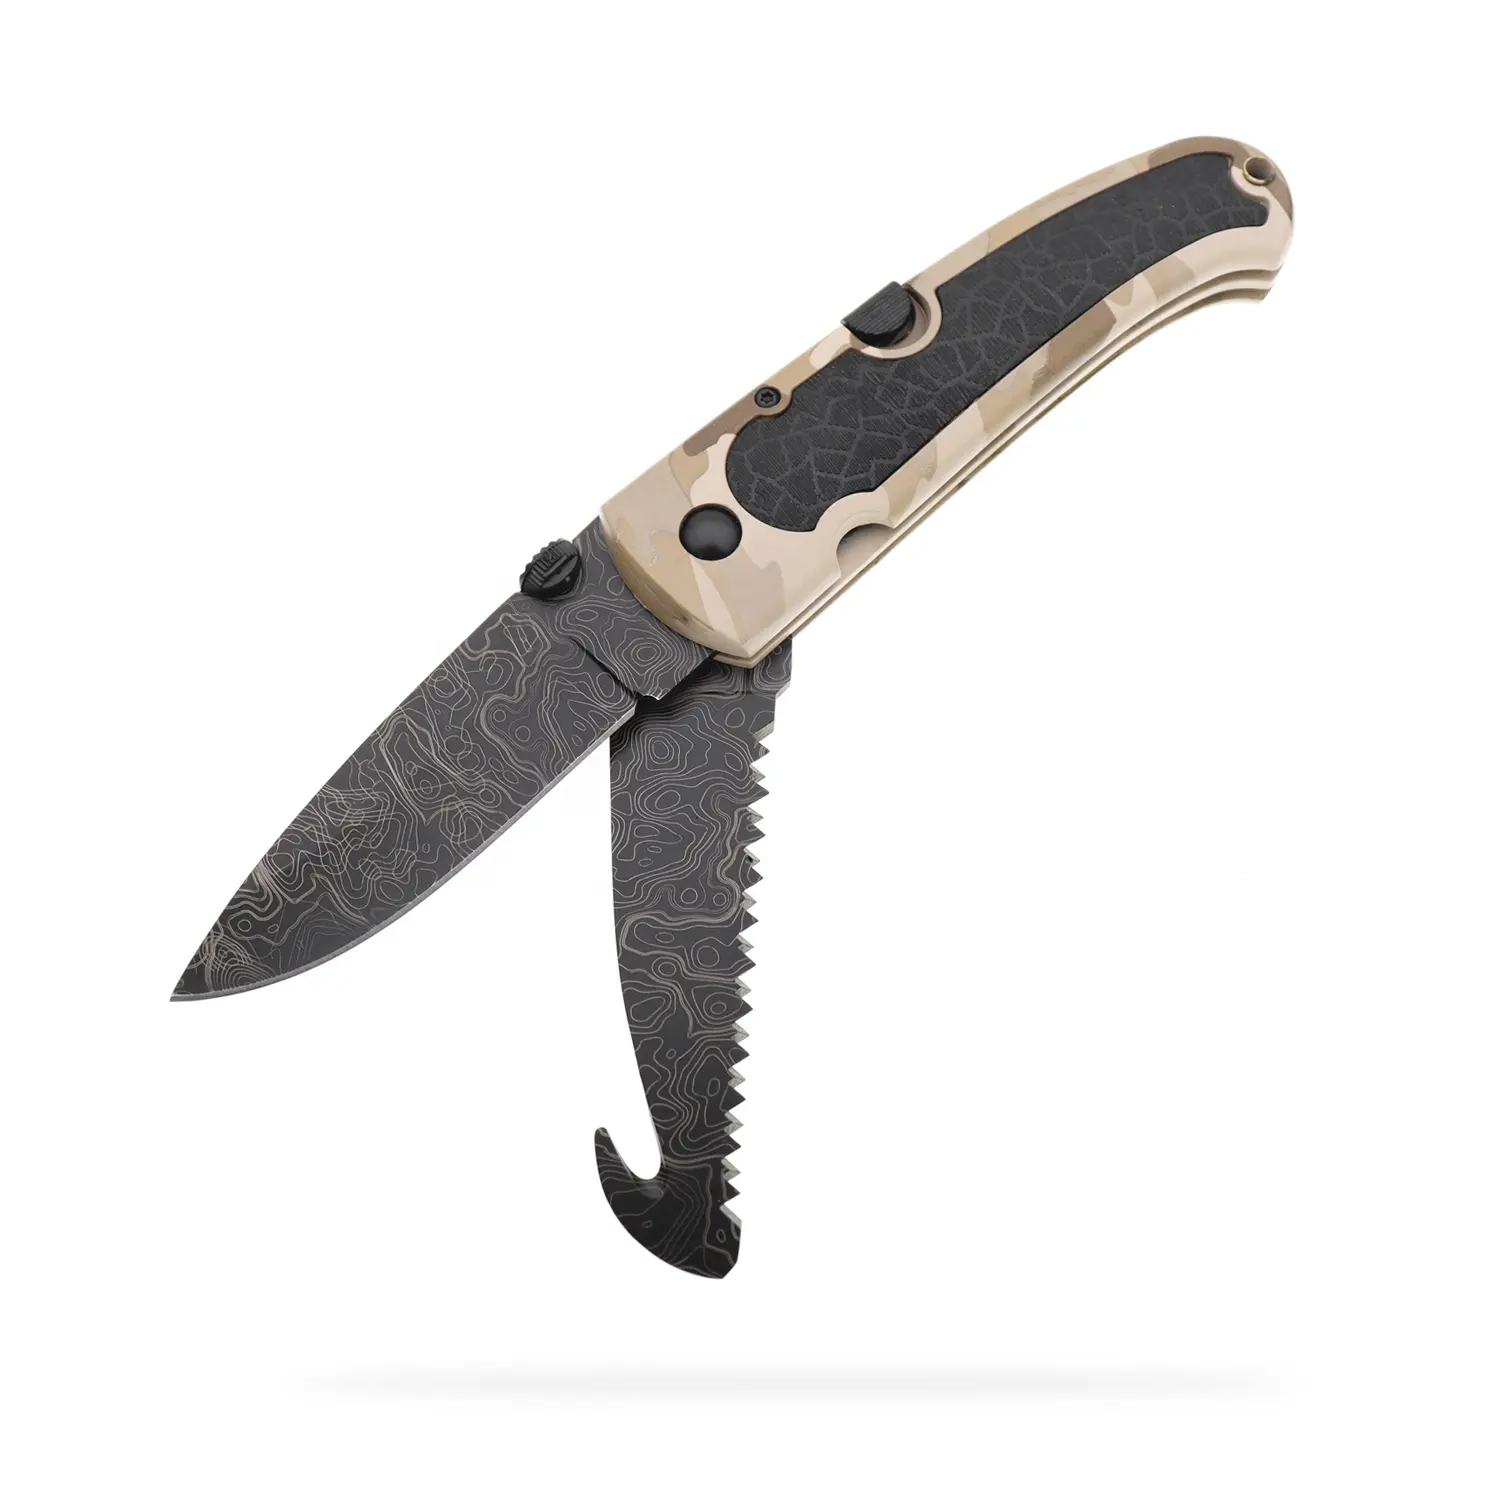 Camo Multi Blade Knife Wood Saw Lock Back Two Blade Folding Pocket Knife Stainless Steel Rubber Handle Hunting Knife for Outdoor